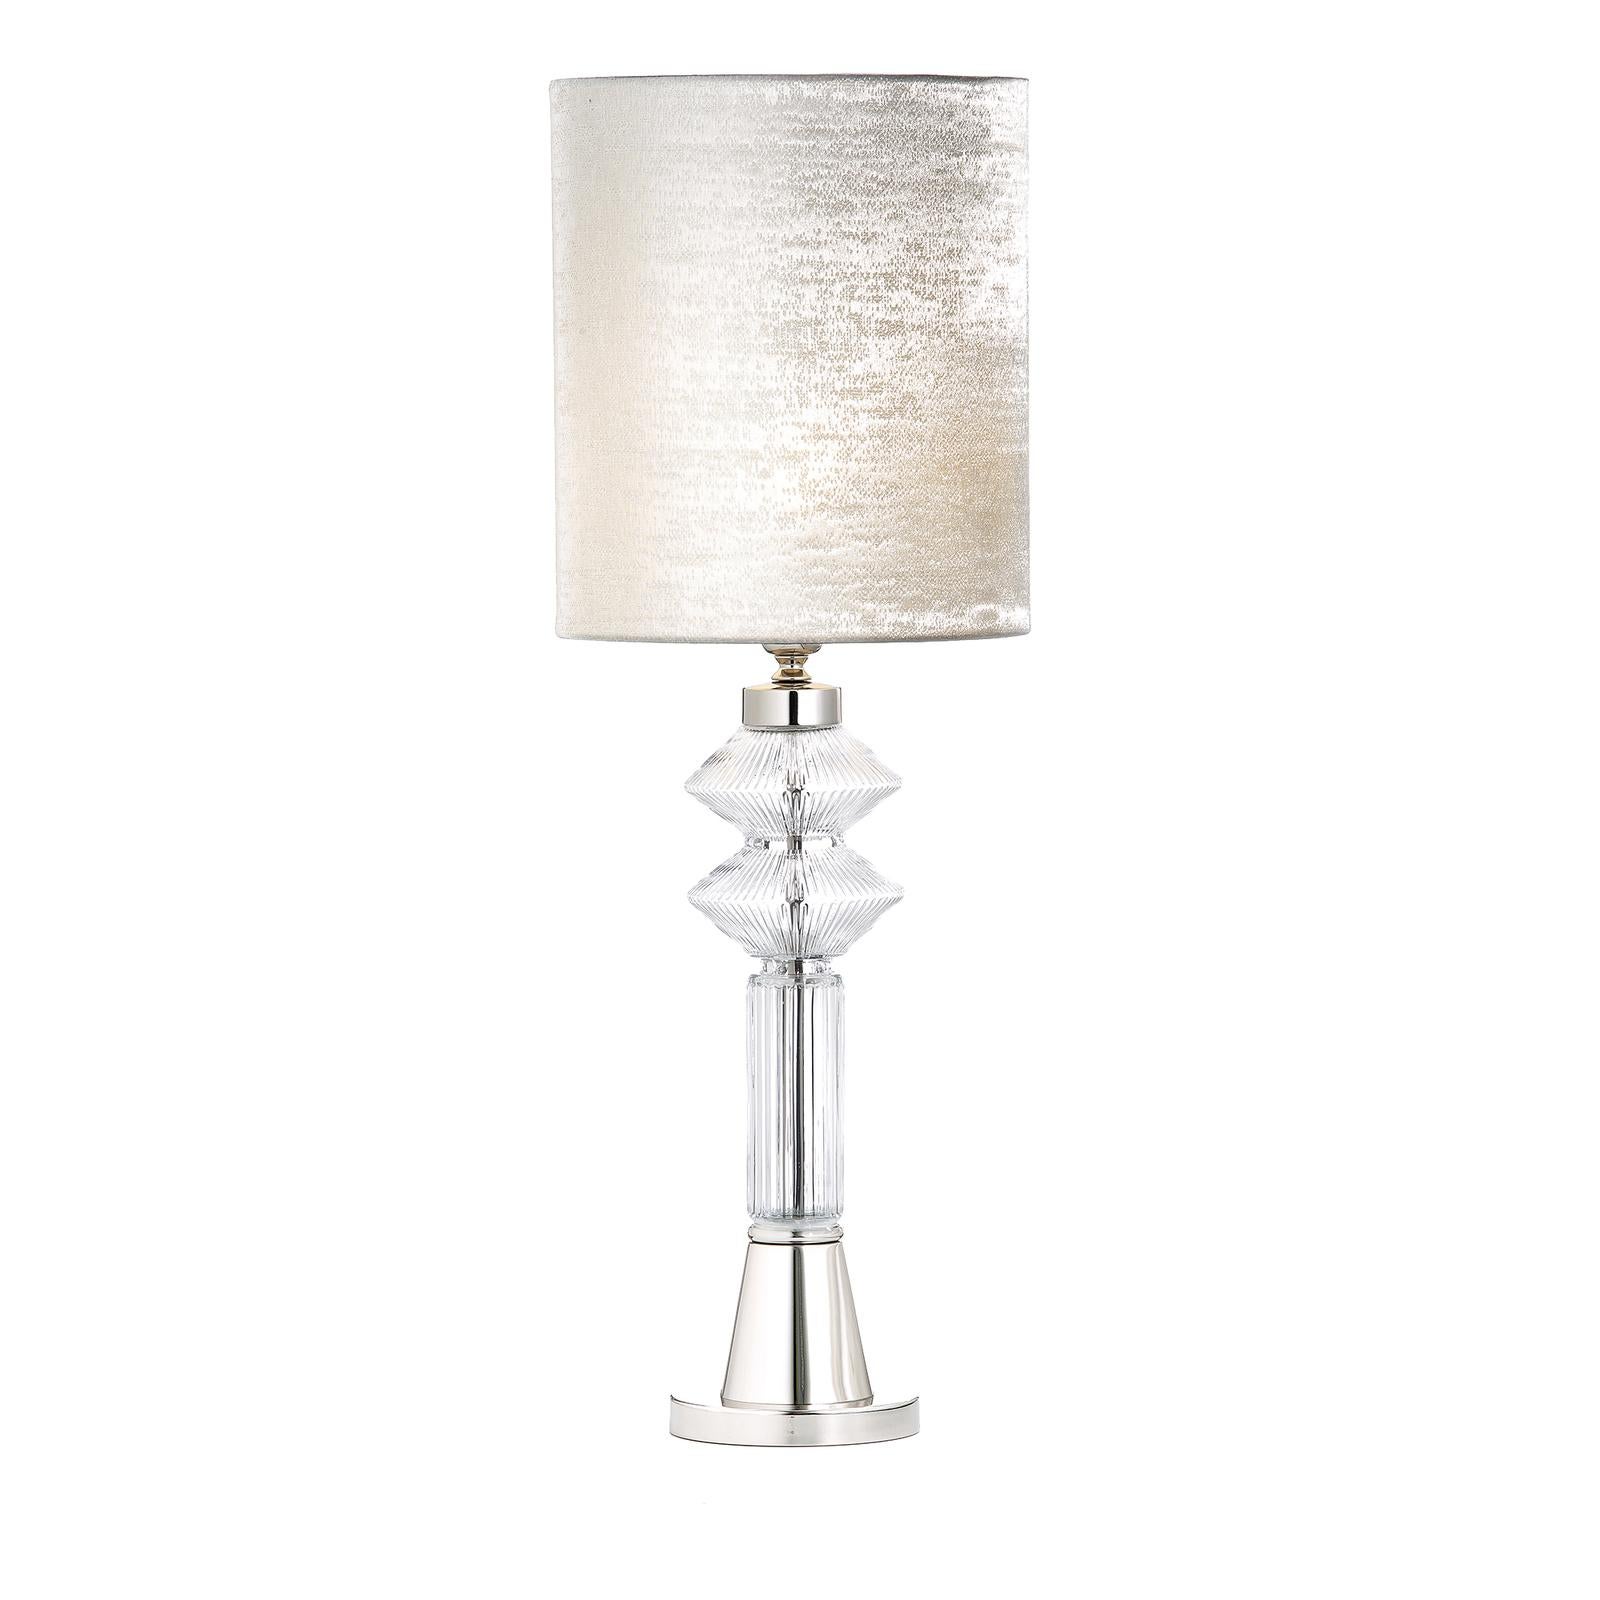 A delicate balance of rigorous geometries and delicate textures creates this unique and charming table lamp that will infuse both a modern or classic home with understated sophistication. The metal structure has a polished nickel finish and features